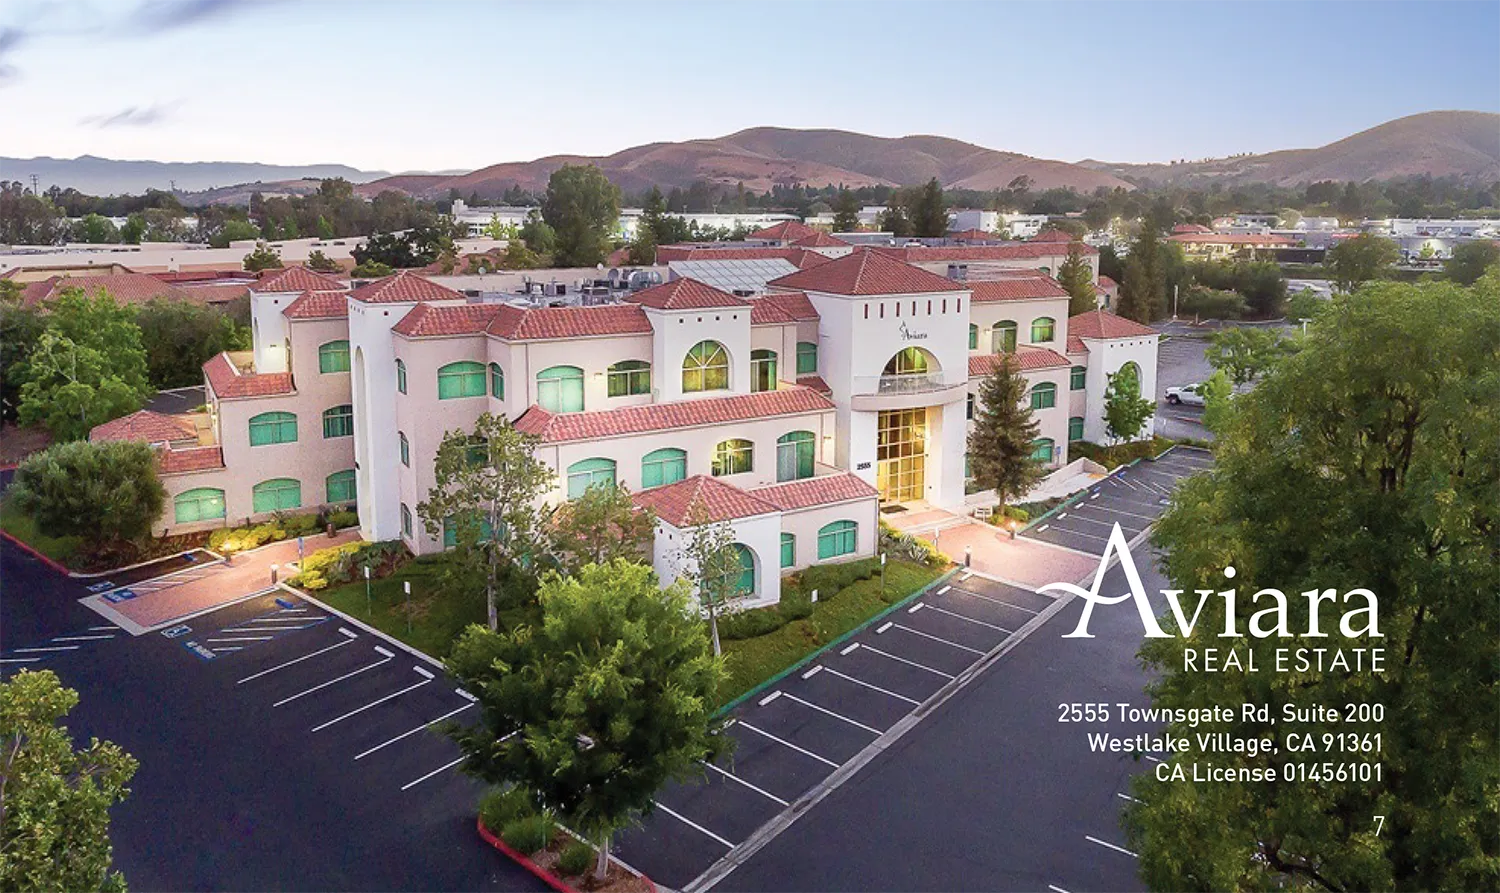 The Aviara Real Estate Building in Thousand Oaks